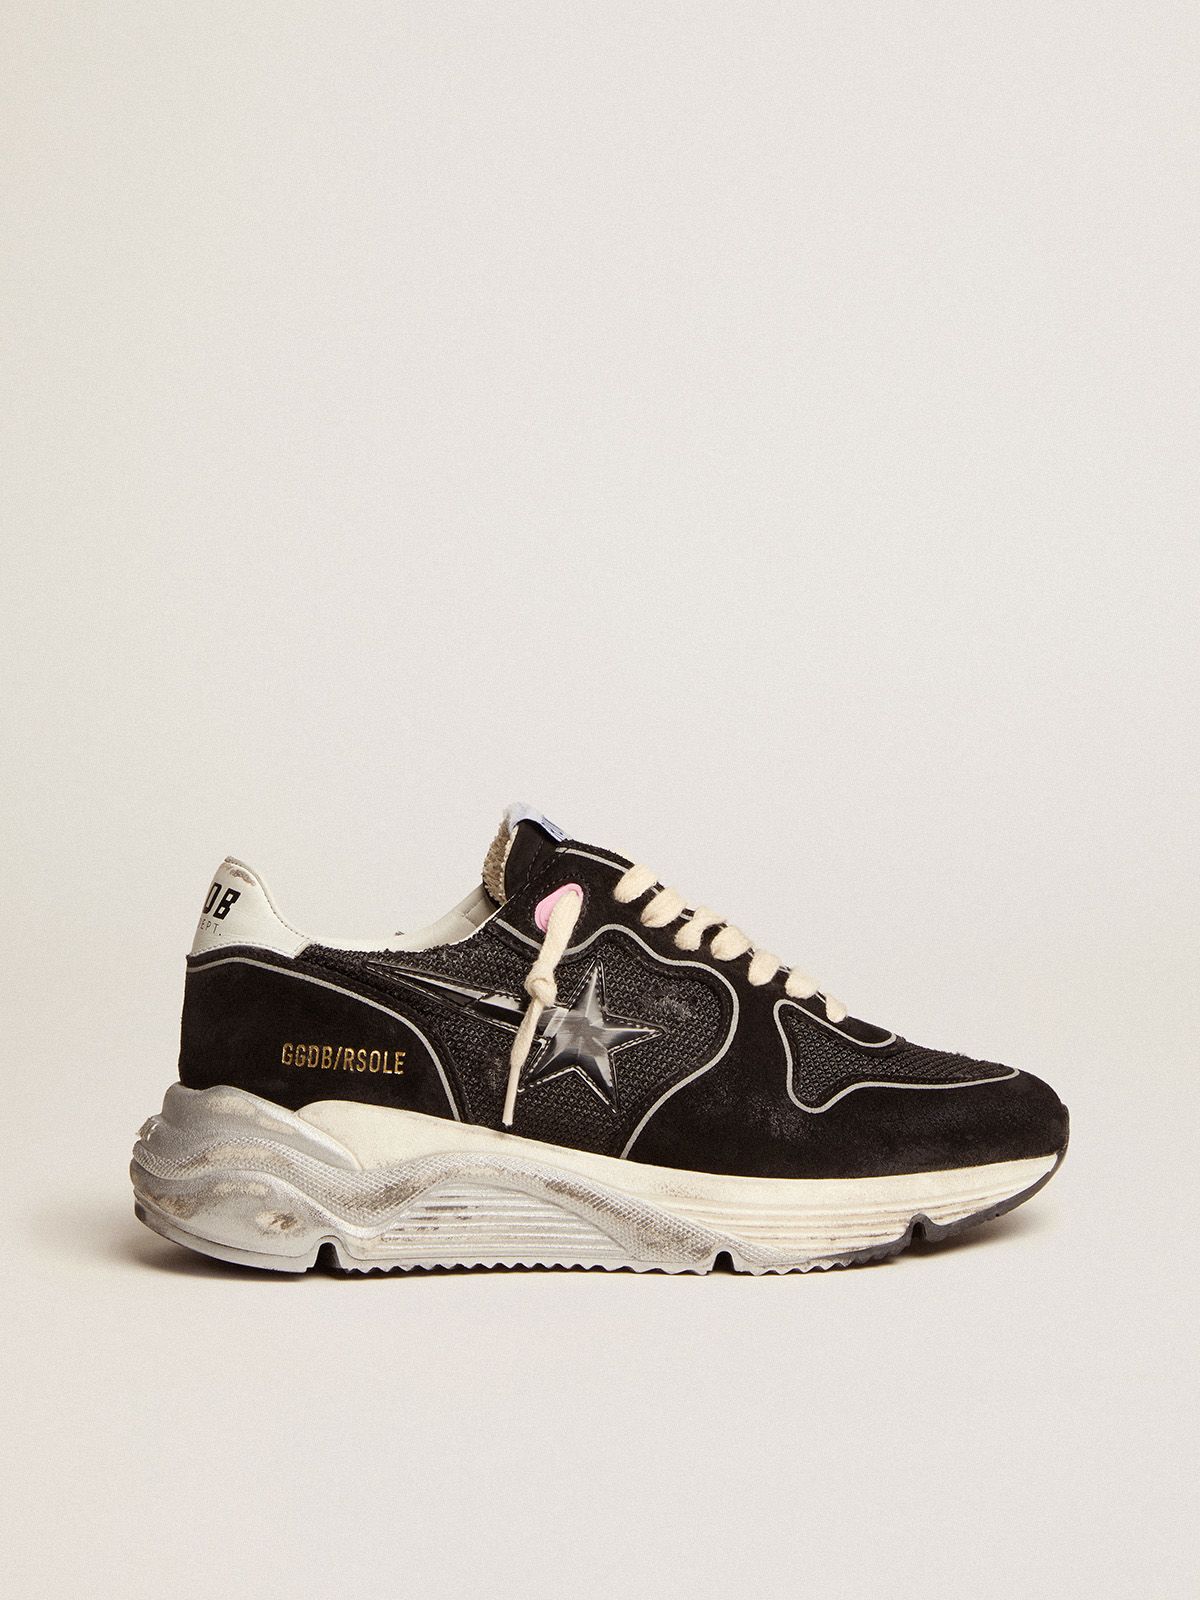 Golden Goose Ball Star Uomo Running Sole sneakers with black mesh and suede upper and 3D star